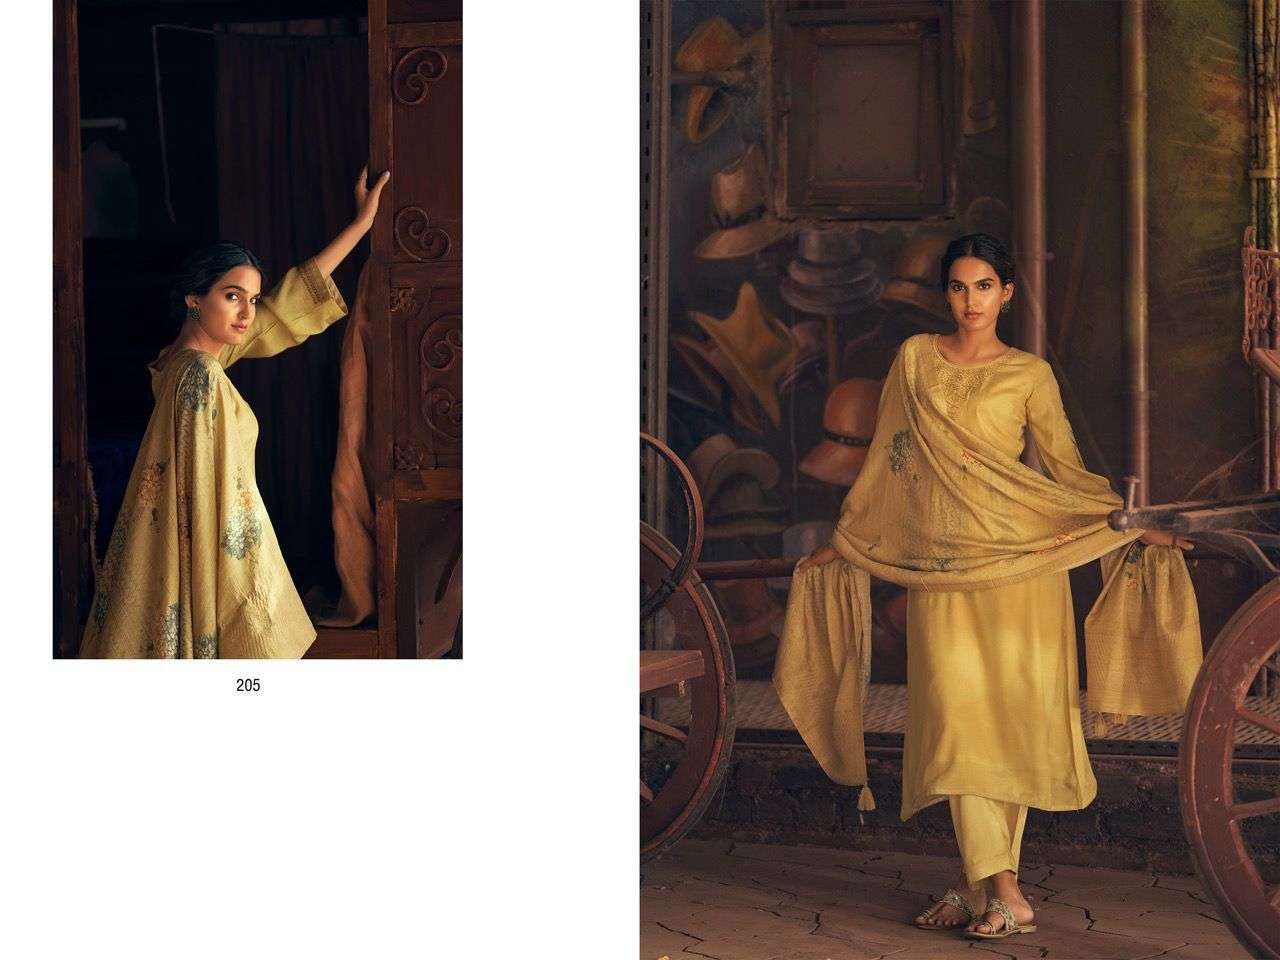 JASHNE ALAM BY AIQA 201 TO 208 SERIES BEAUTIFUL SUITS COLORFUL STYLISH FANCY CASUAL WEAR & ETHNIC WEAR MUSLIN SILK DRESSES AT WHOLESALE PRICE